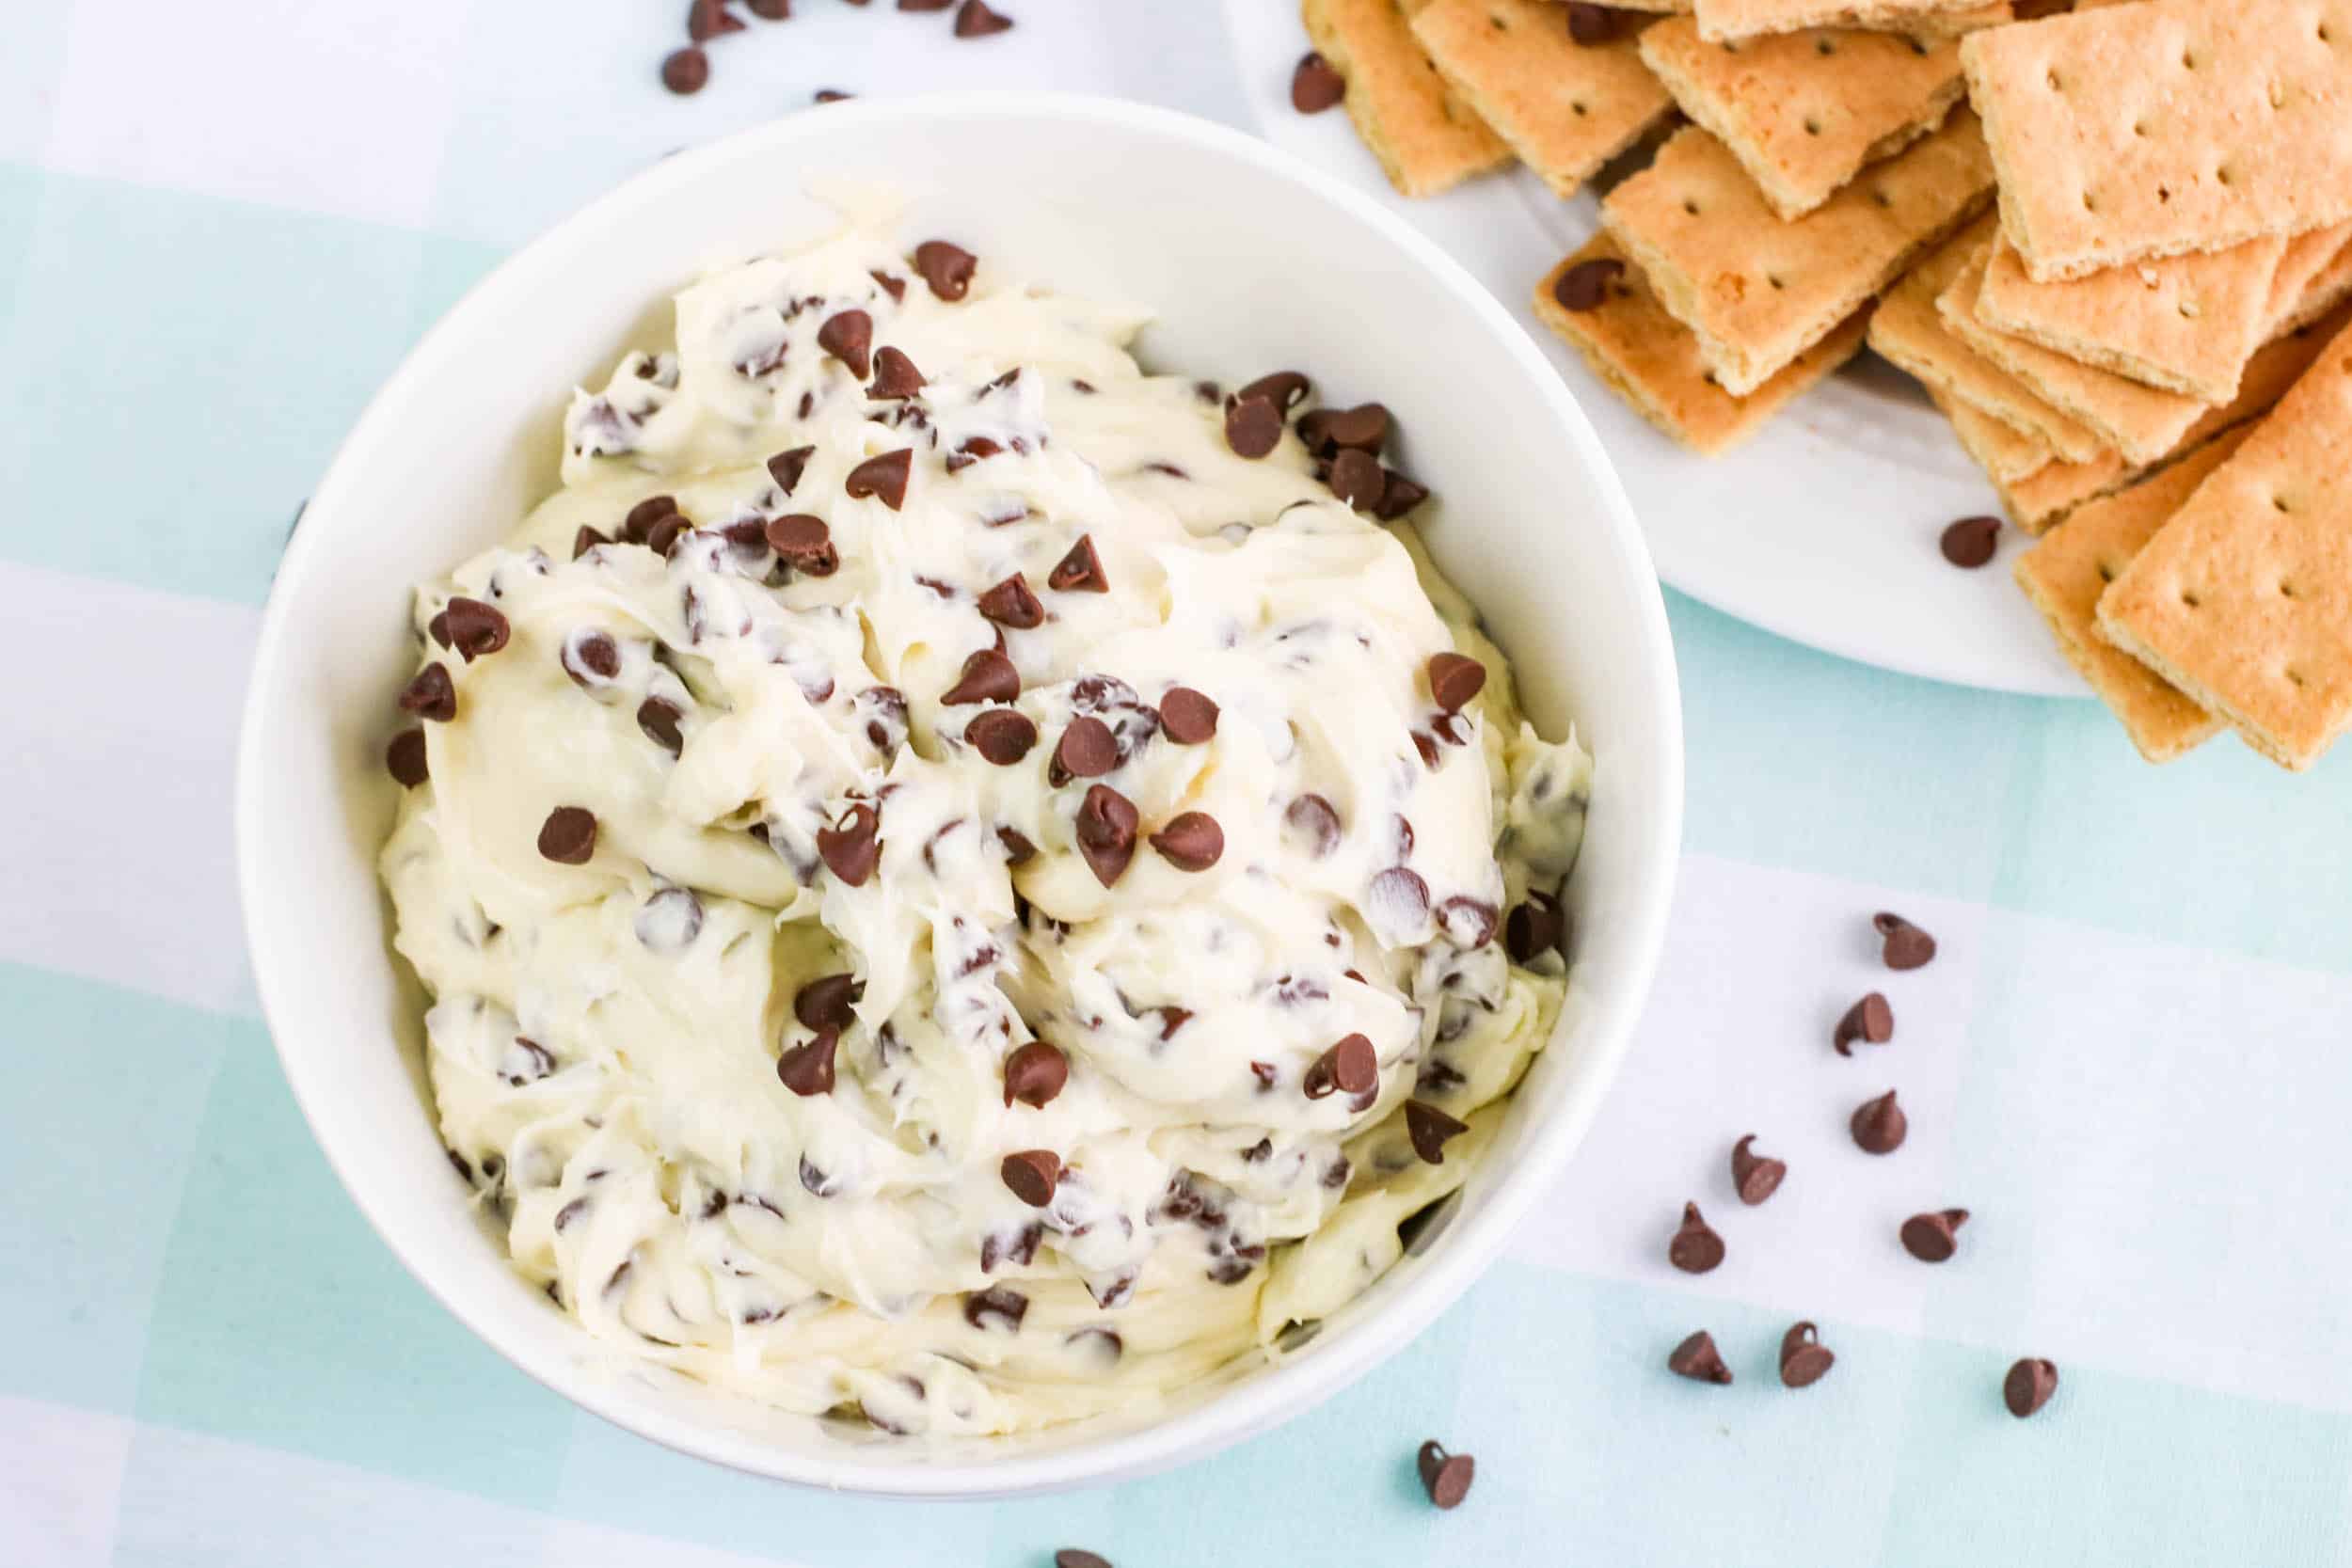 You won't believe how easy it is to make this chocolate chip cookie dough dip recipe in less than five minutes.